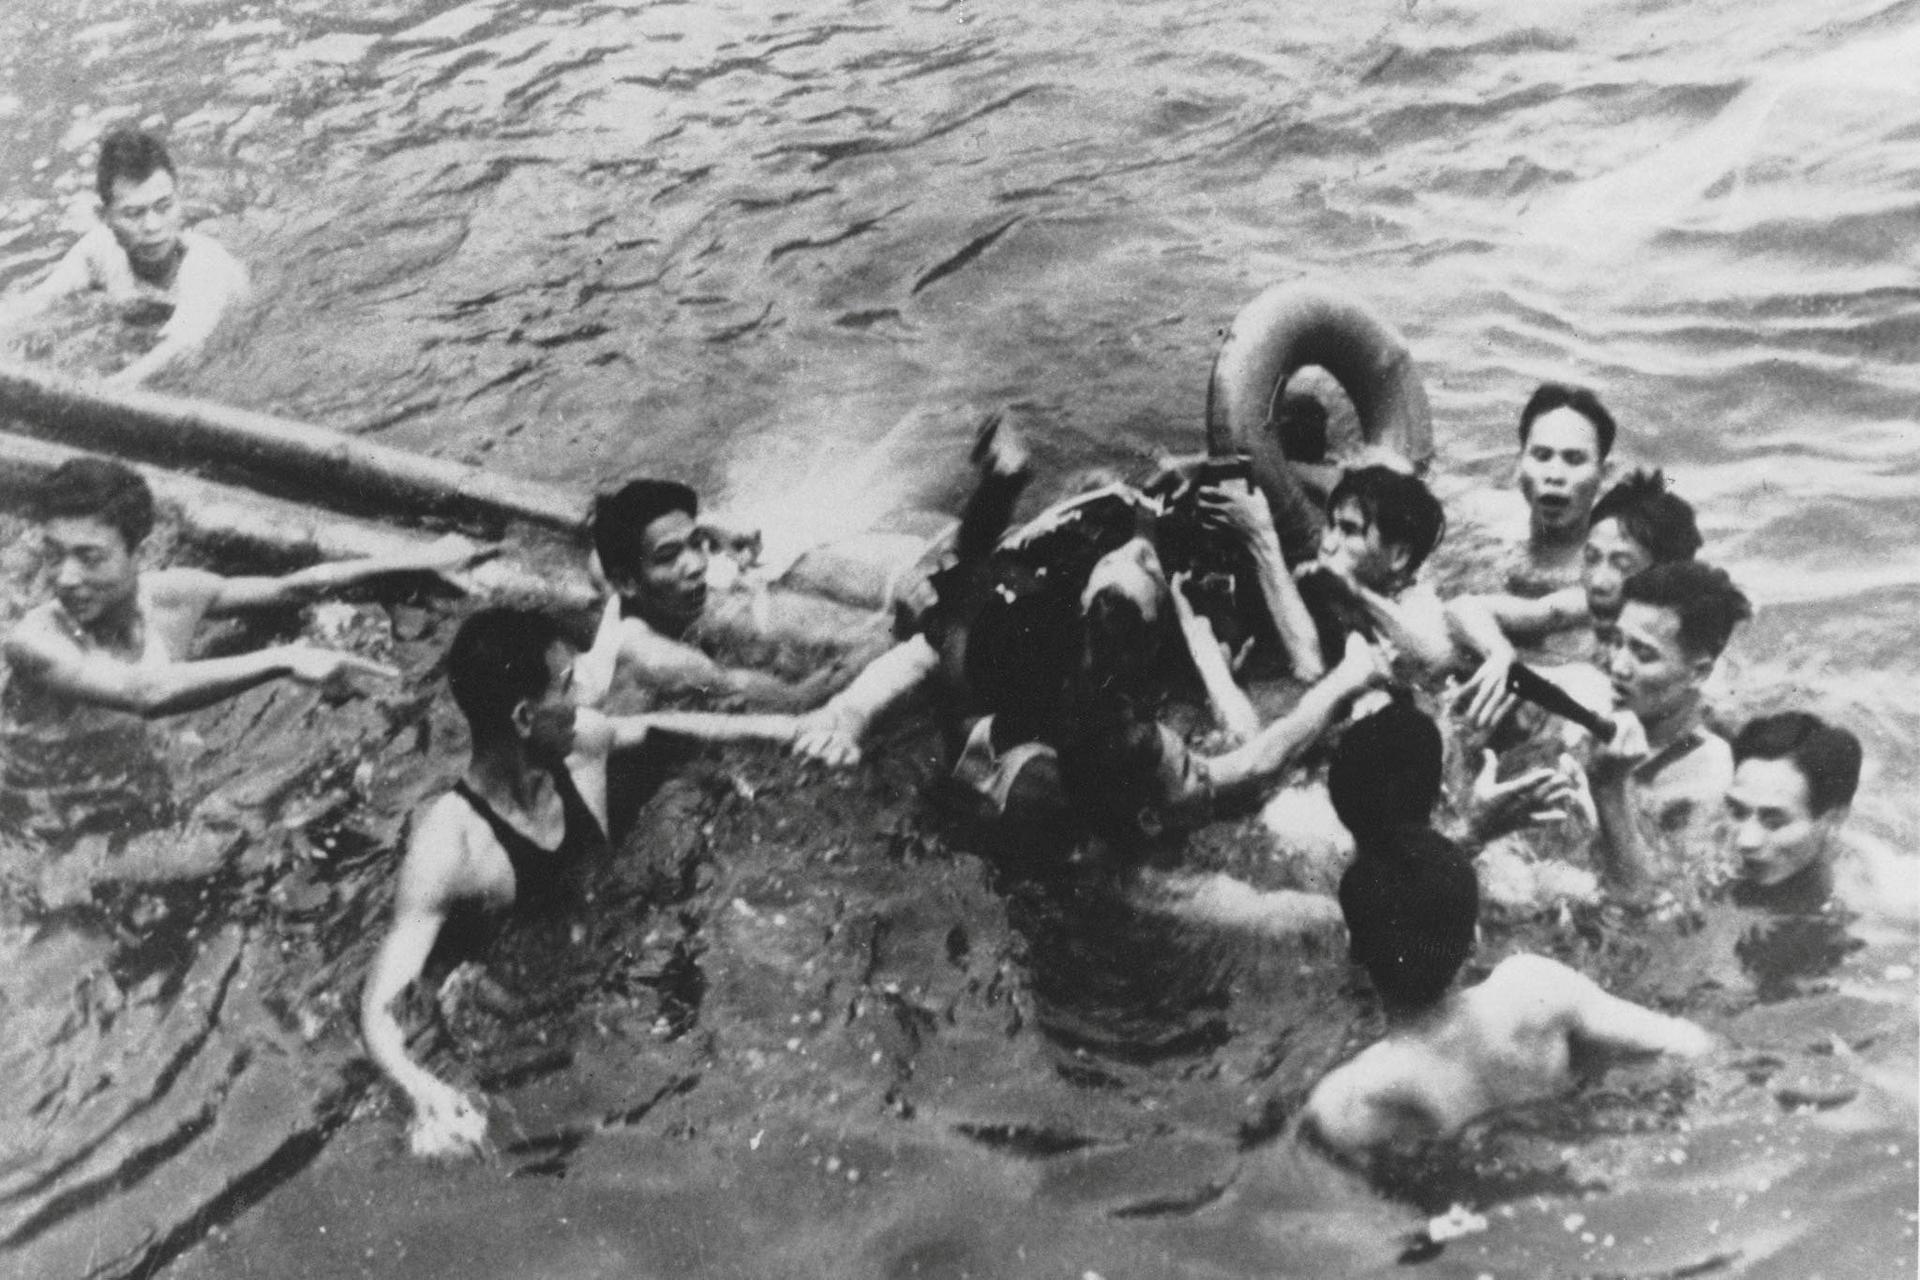 John McCain is pulled out of a Hanoi lake by a mix of North Vietnamese Army (NVA) and Vietnamese citizens